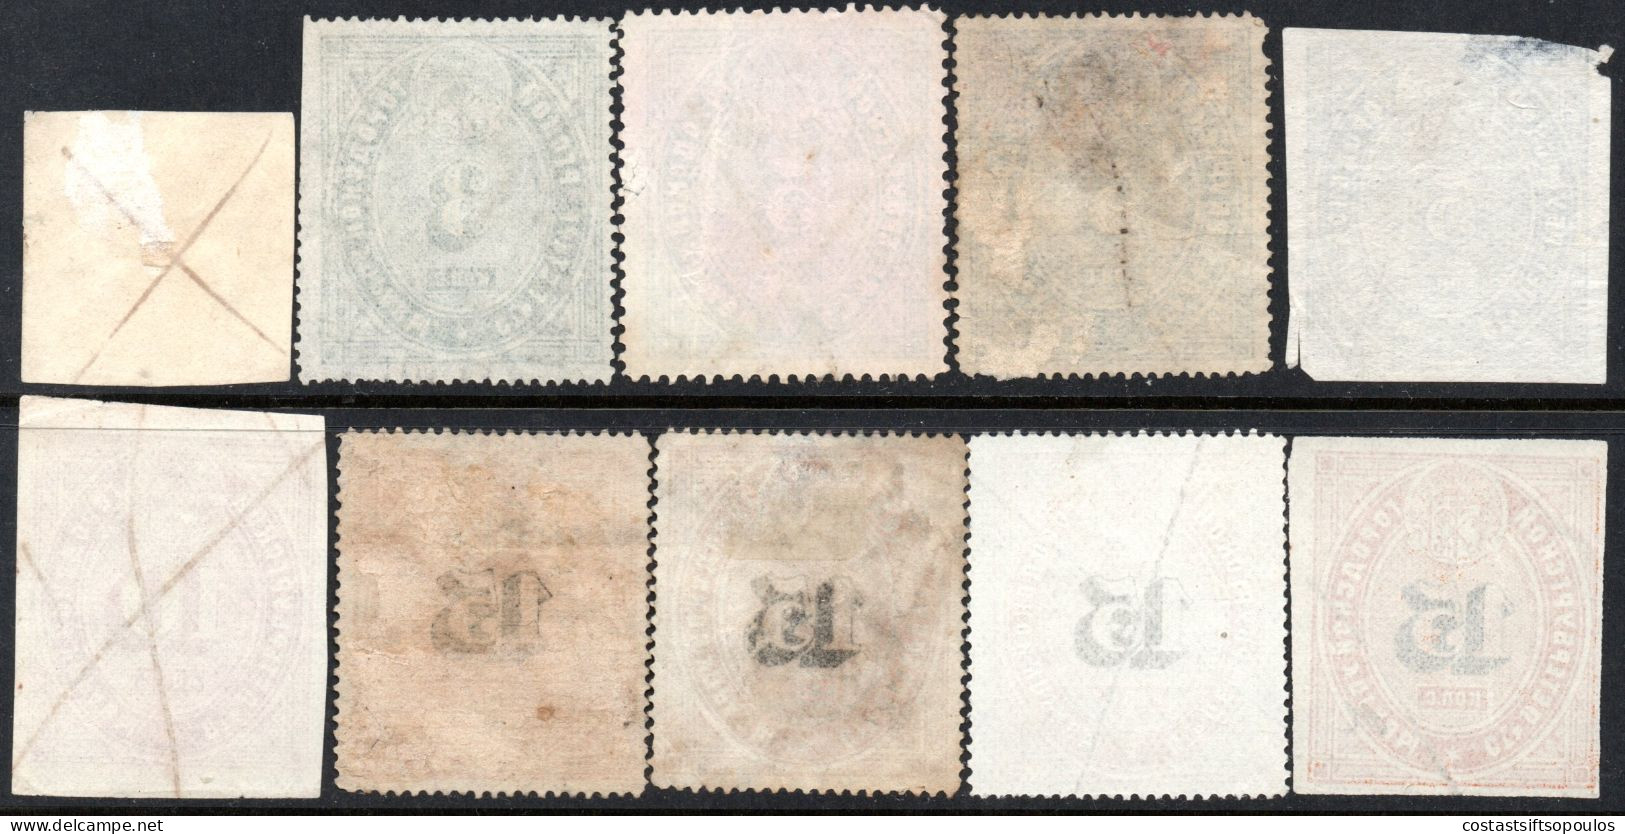 3123 10 USED MUNICIPAL REVENUES LOT,M SOME FAULTS - Fiscali